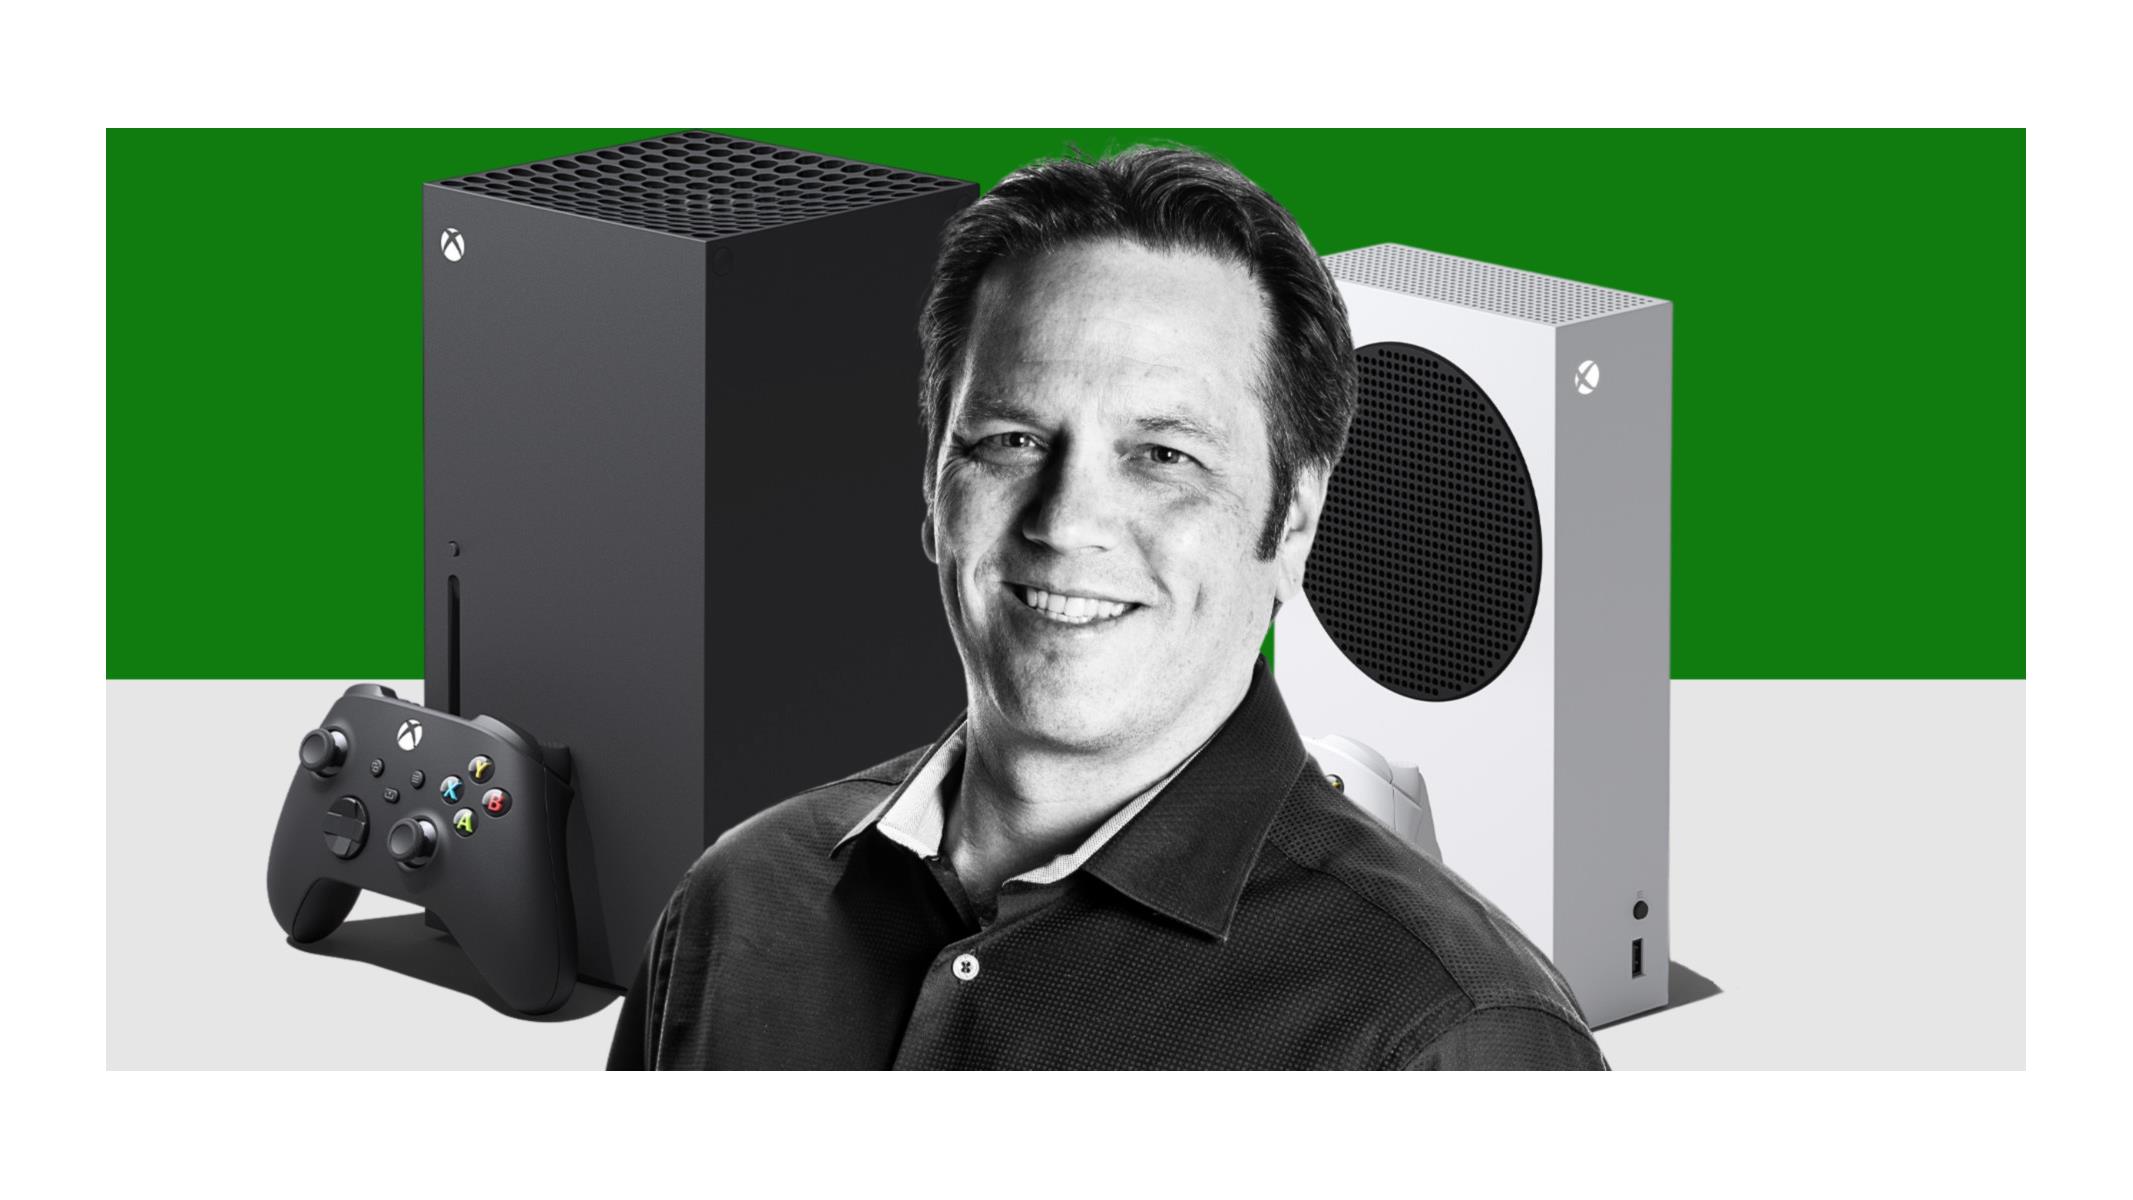 Phil Spencer Speaks About Xbox Series X's Lack Of Exclusives